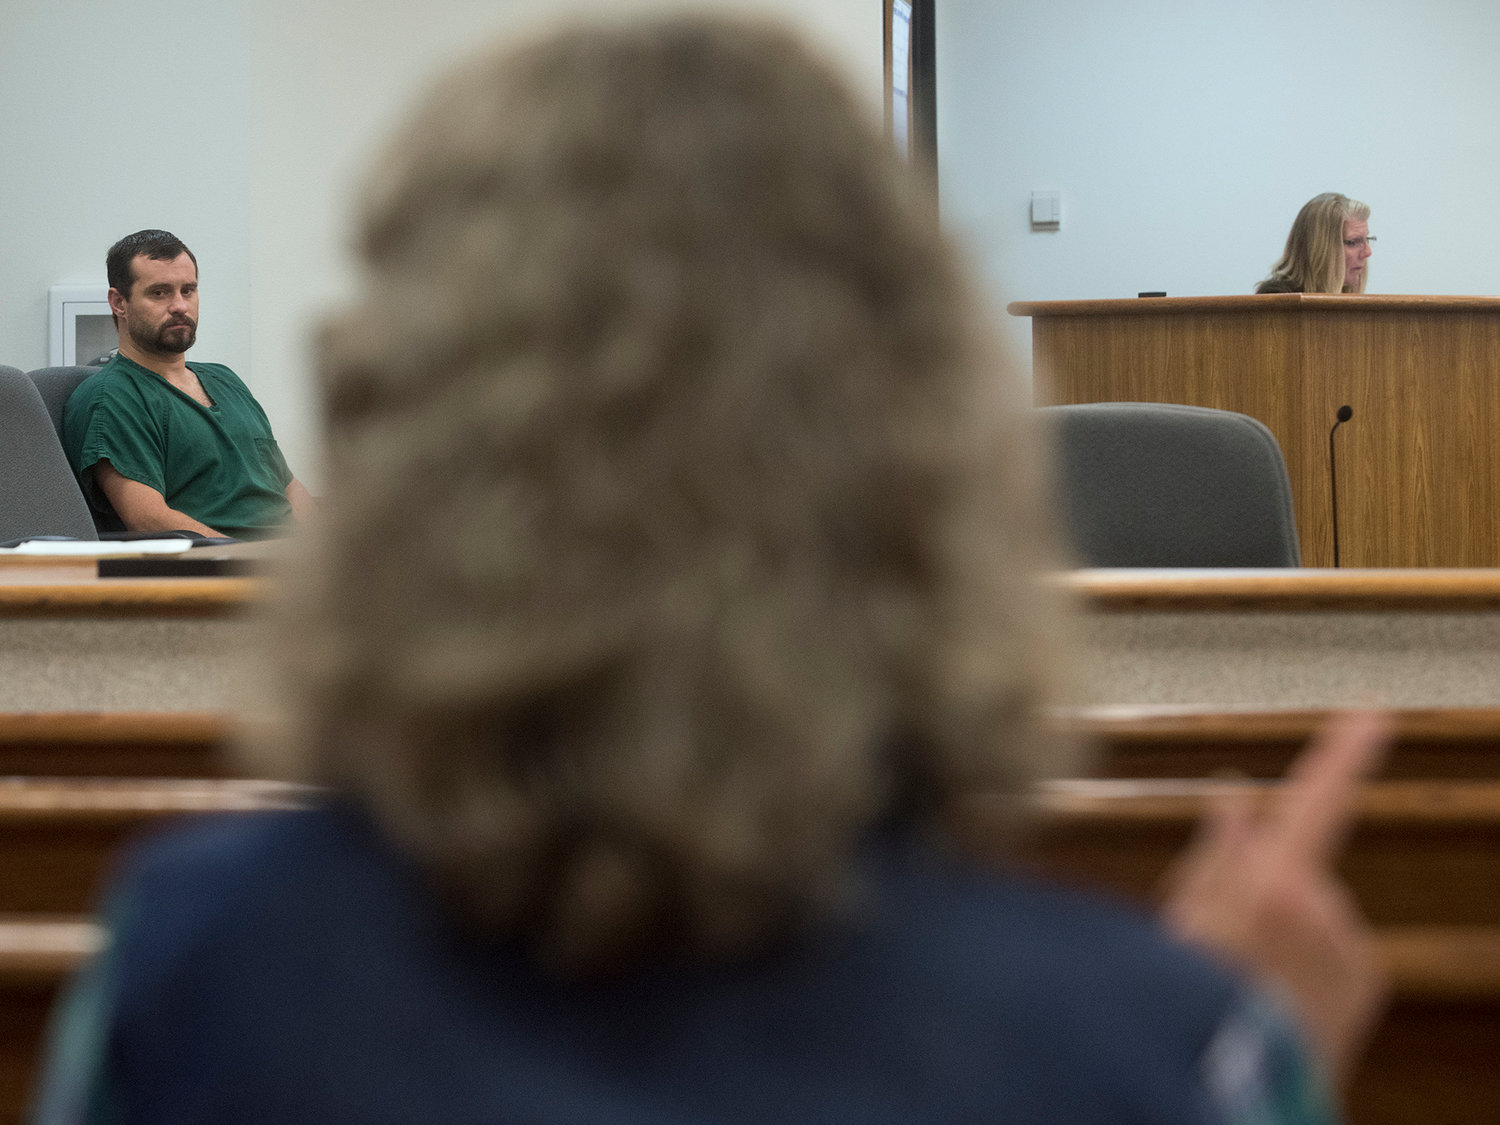 Gail Goodwin uses sign language to communicate with her son, James W. McMillion, who is deaf, prior to the start of his change-of-plea hearing in Lewis County Superior Court on Wednesday afternoon at the Lewis County Law and Justice Center in Chehalis.